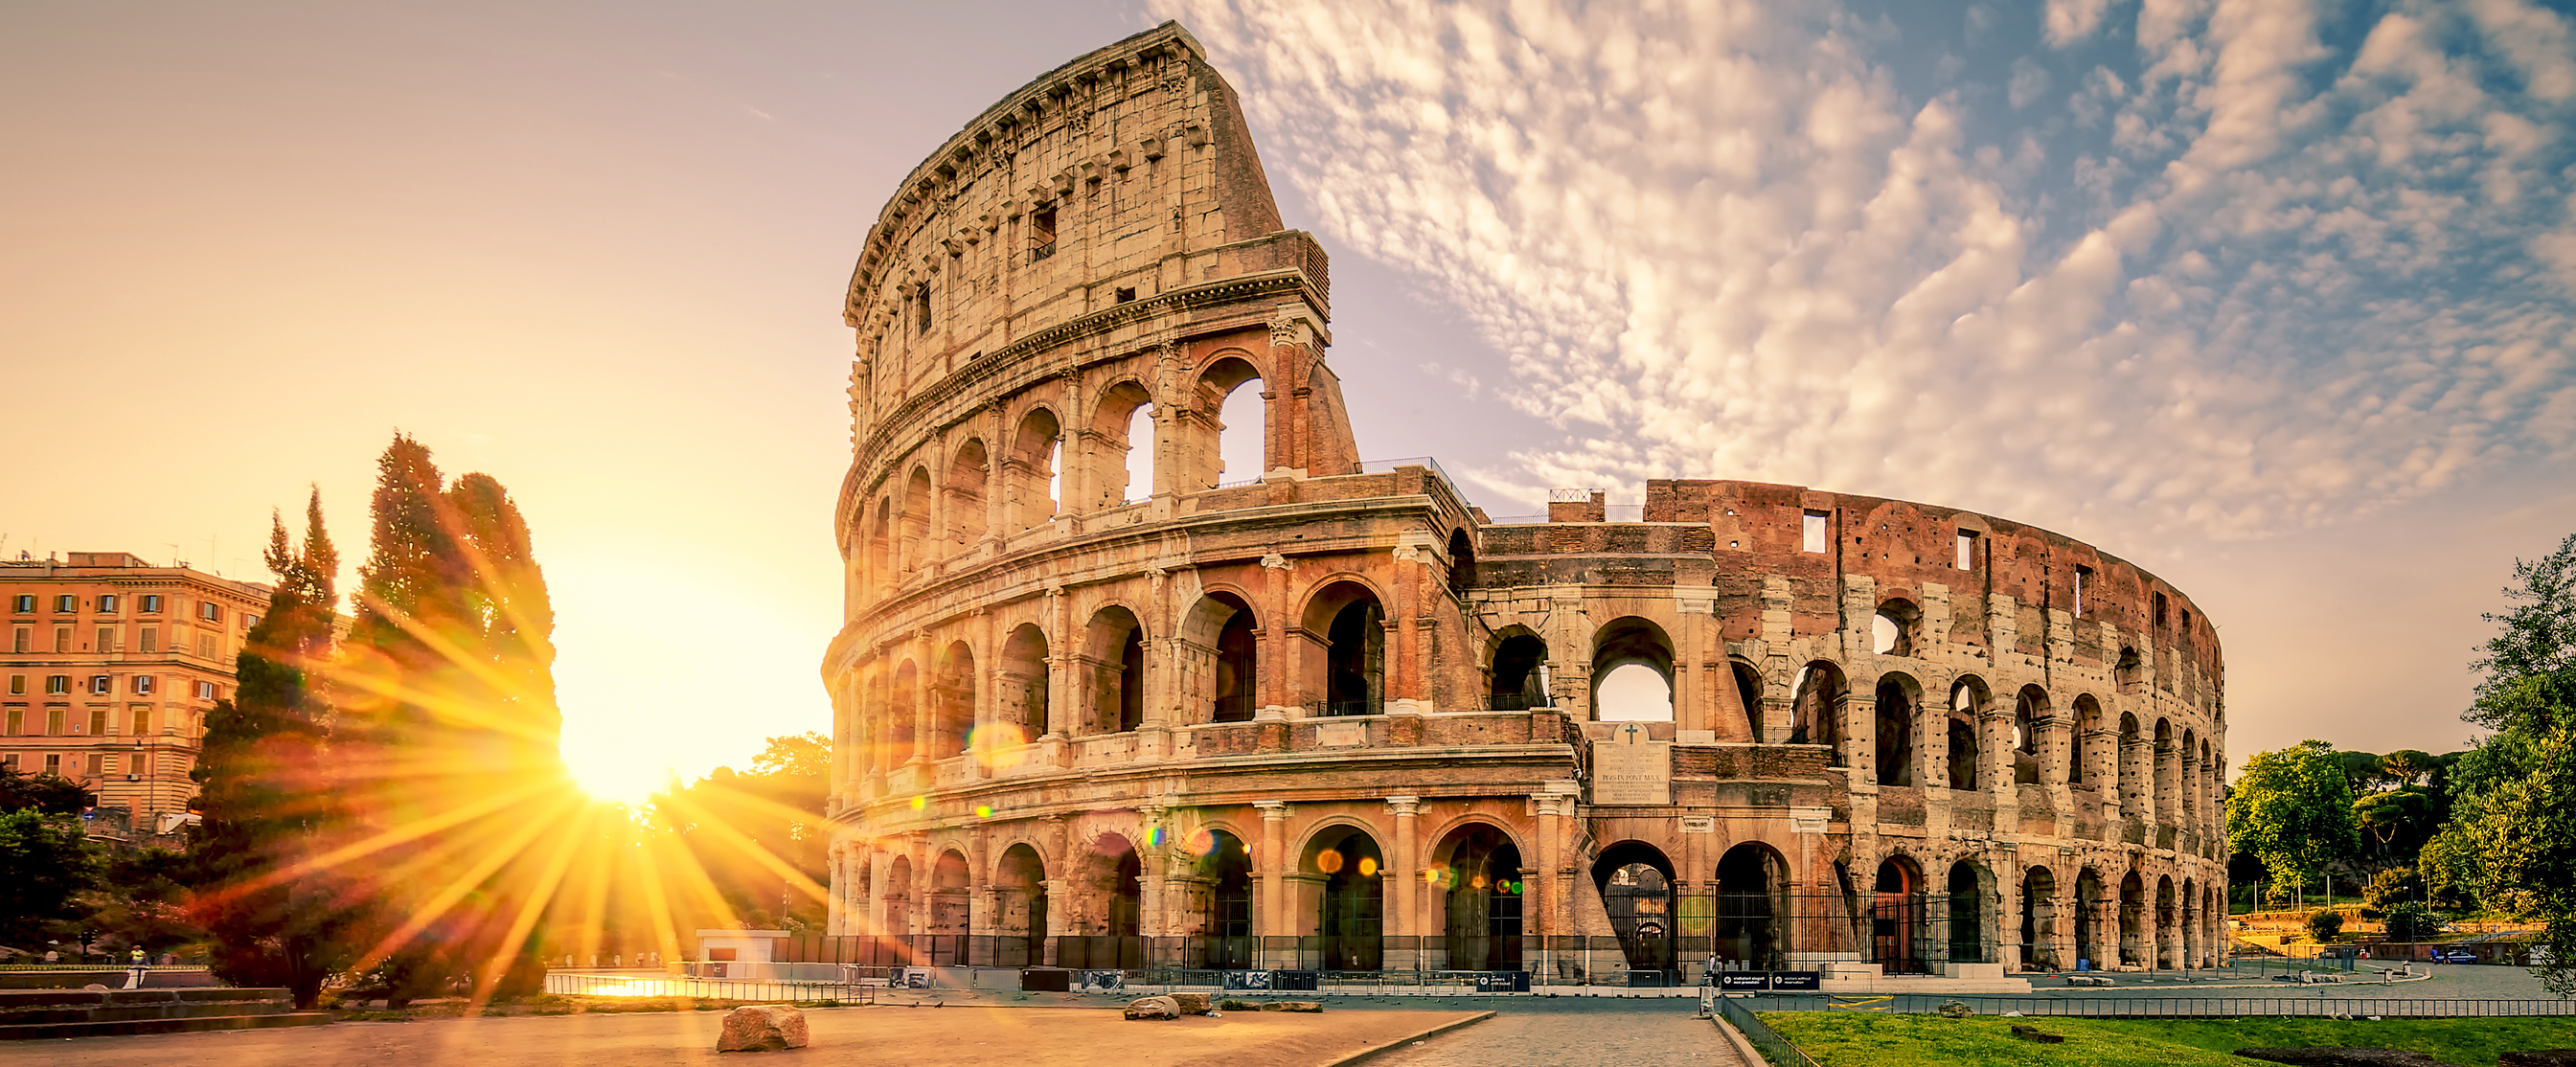 Flights to Rome in the $300s round-trip!